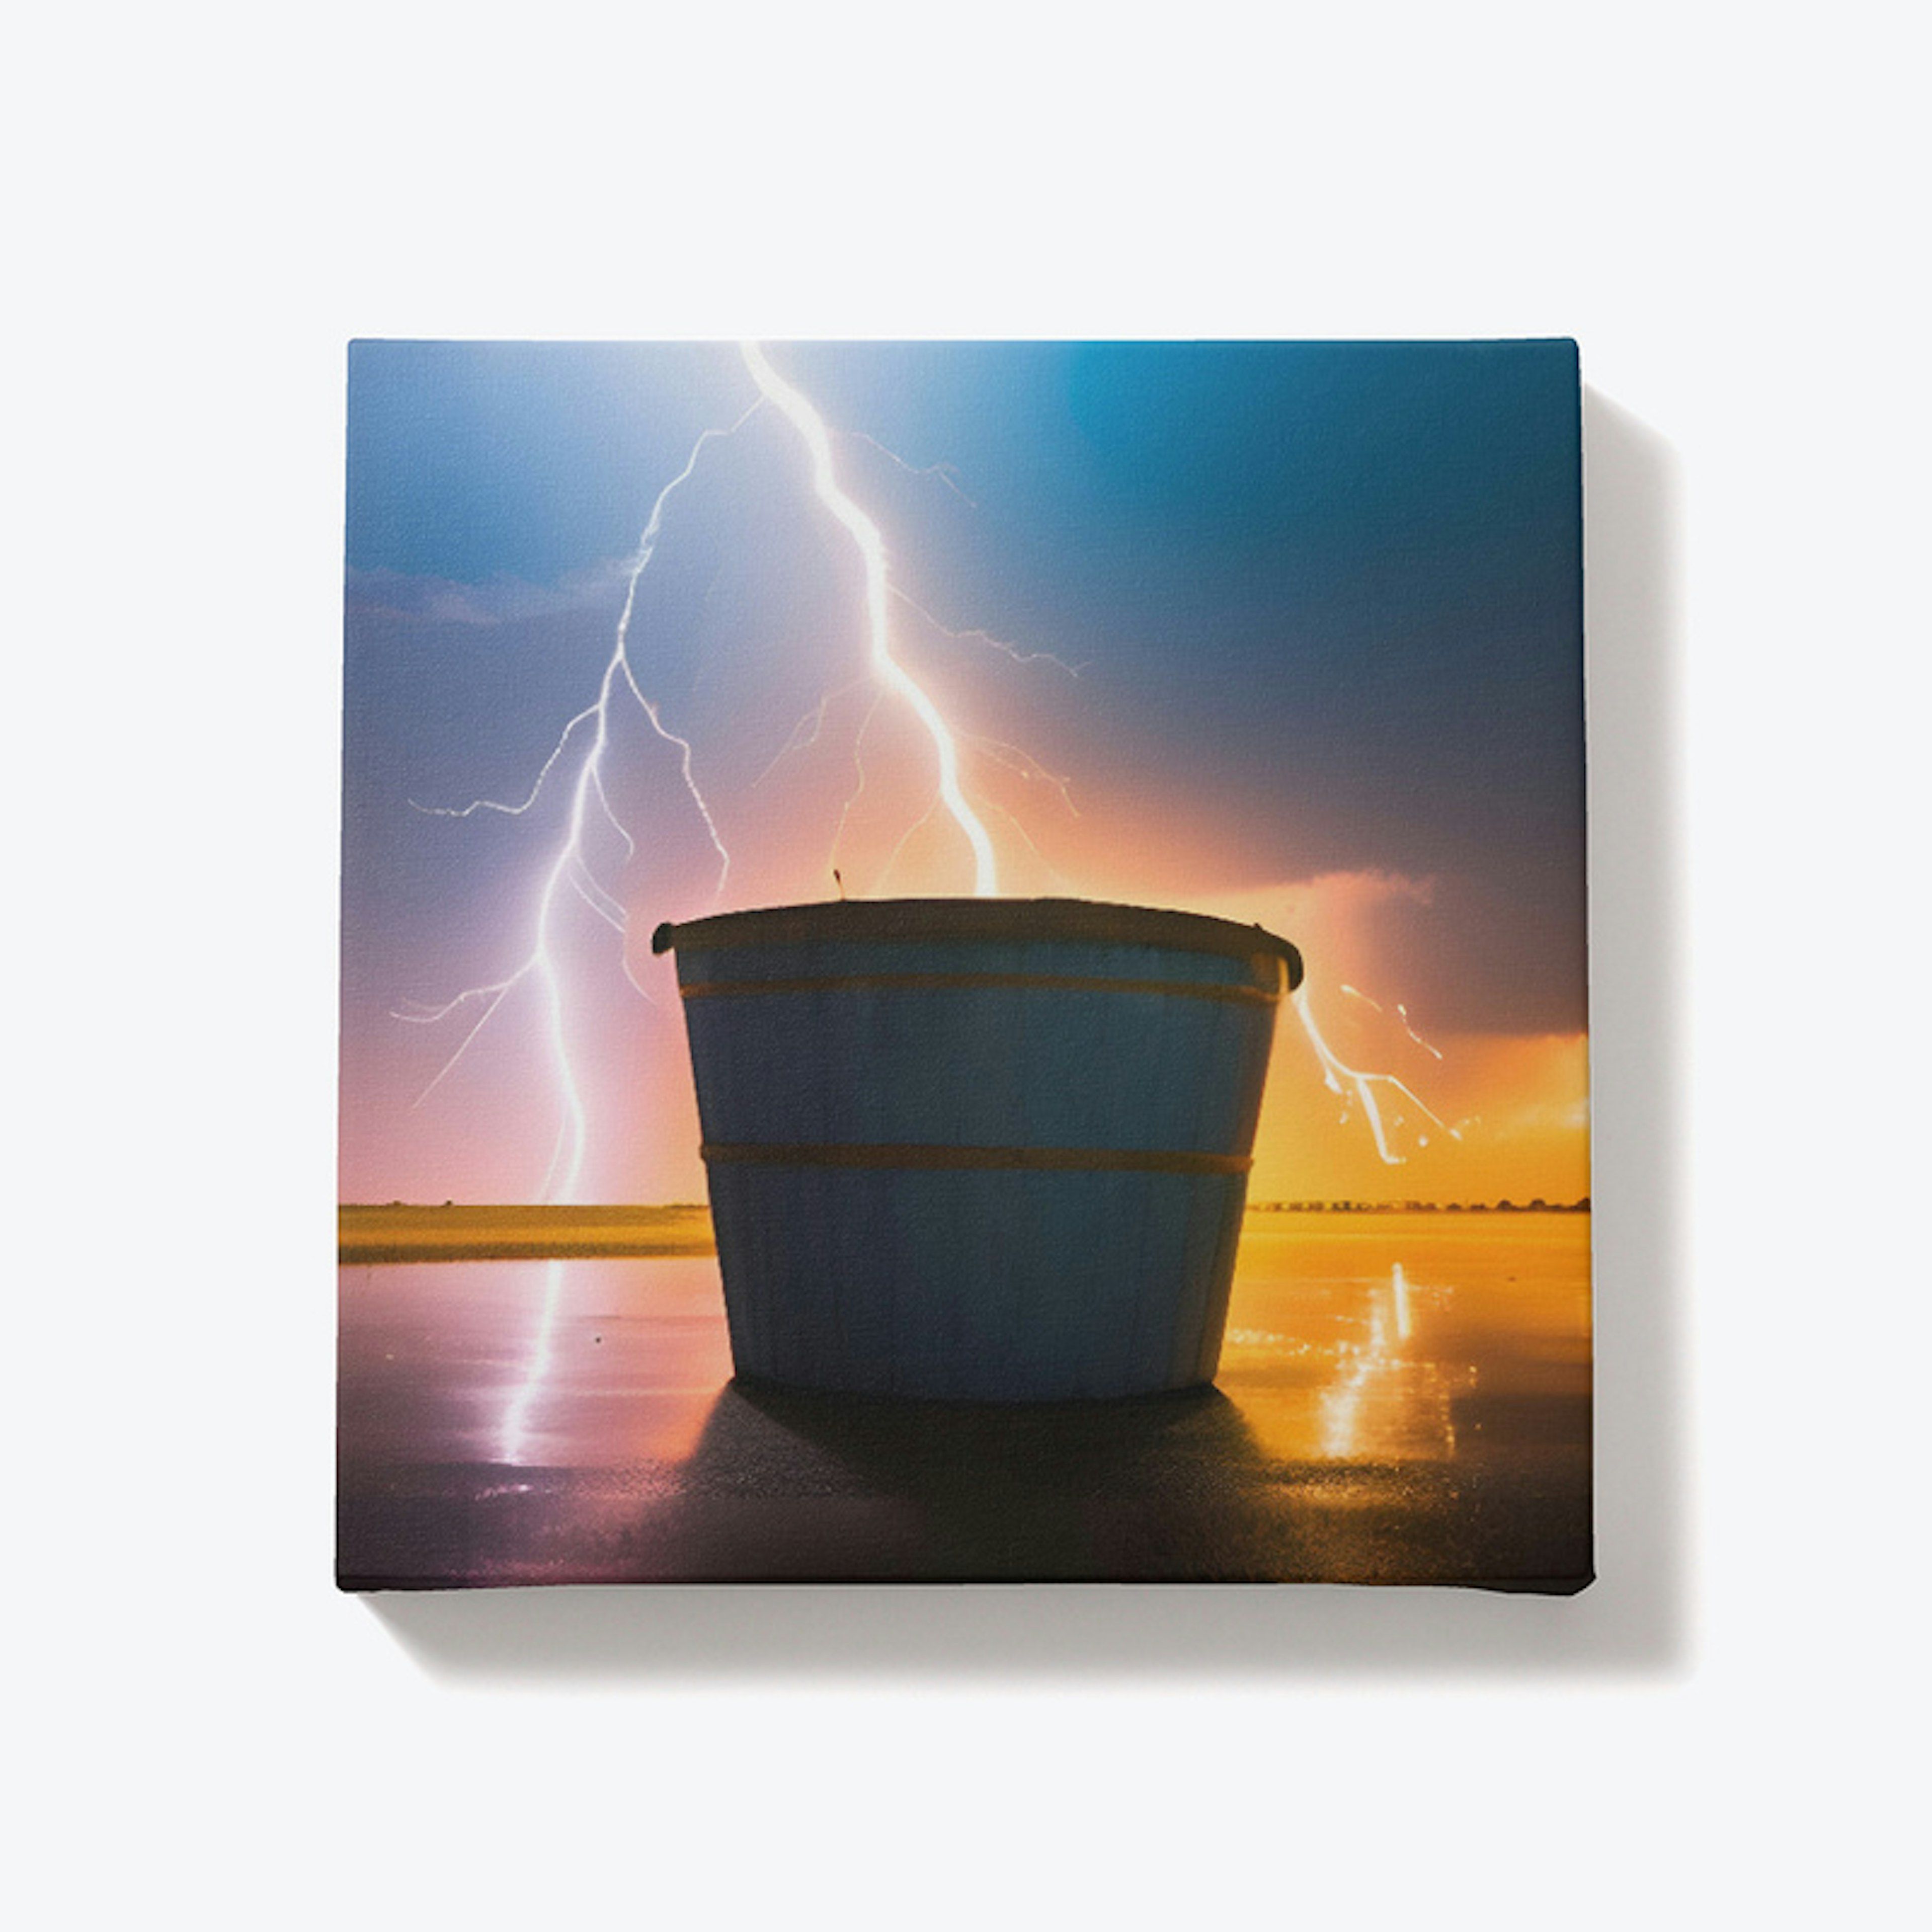 A bucket collecting lightning